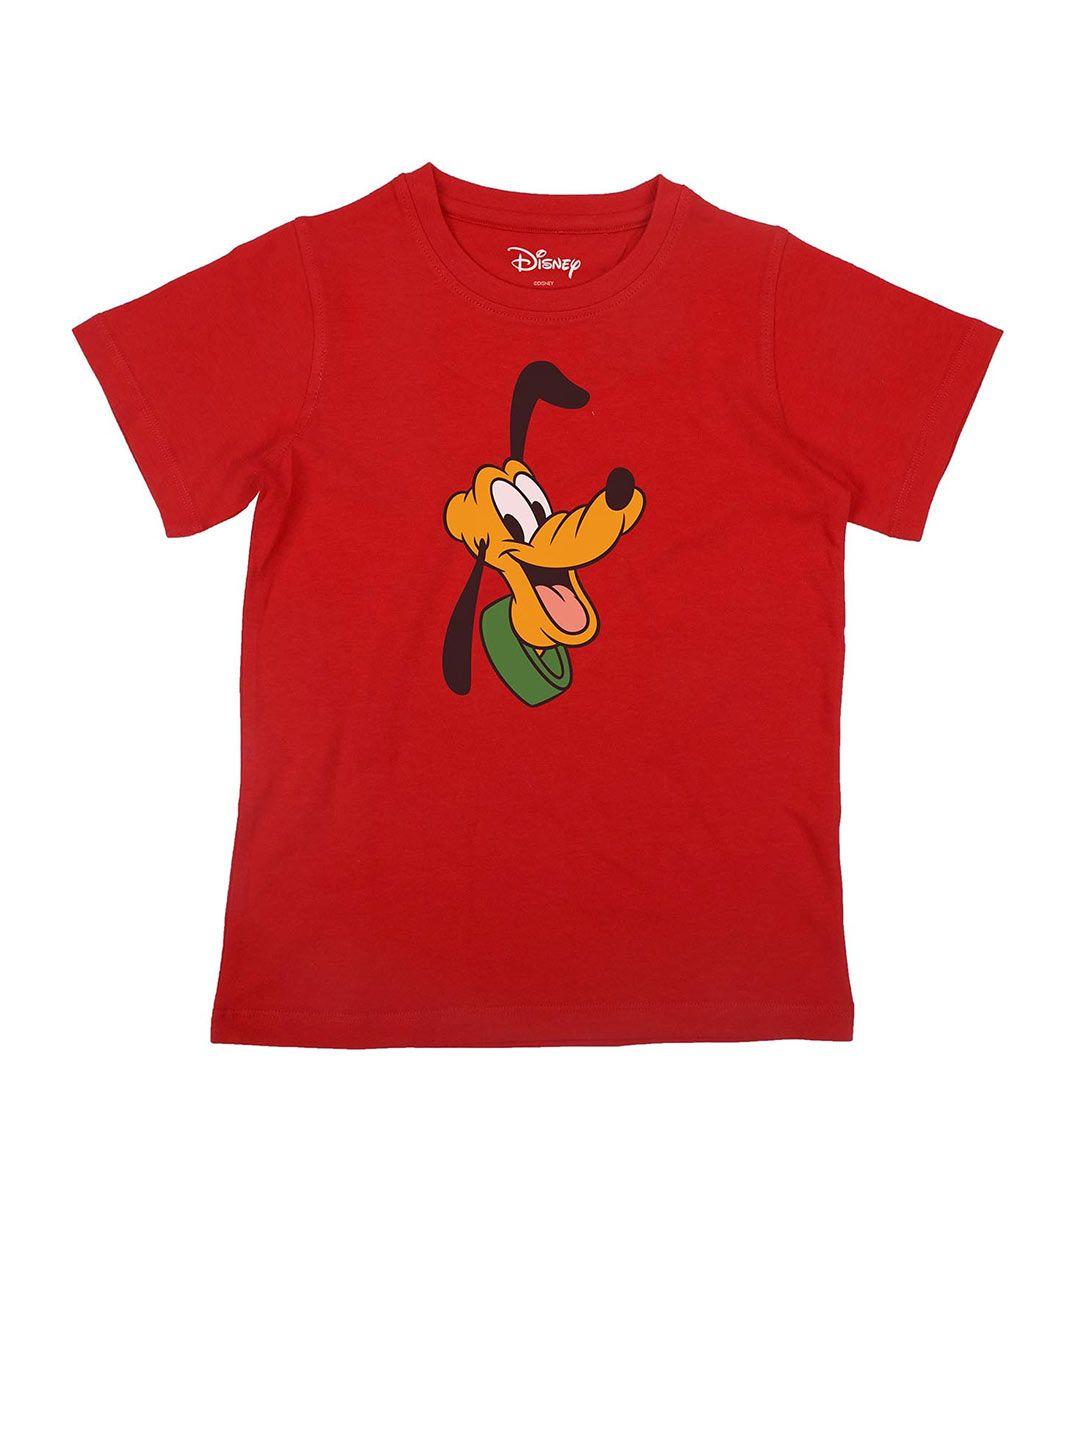 disney by wear your mind boys red printed t-shirt